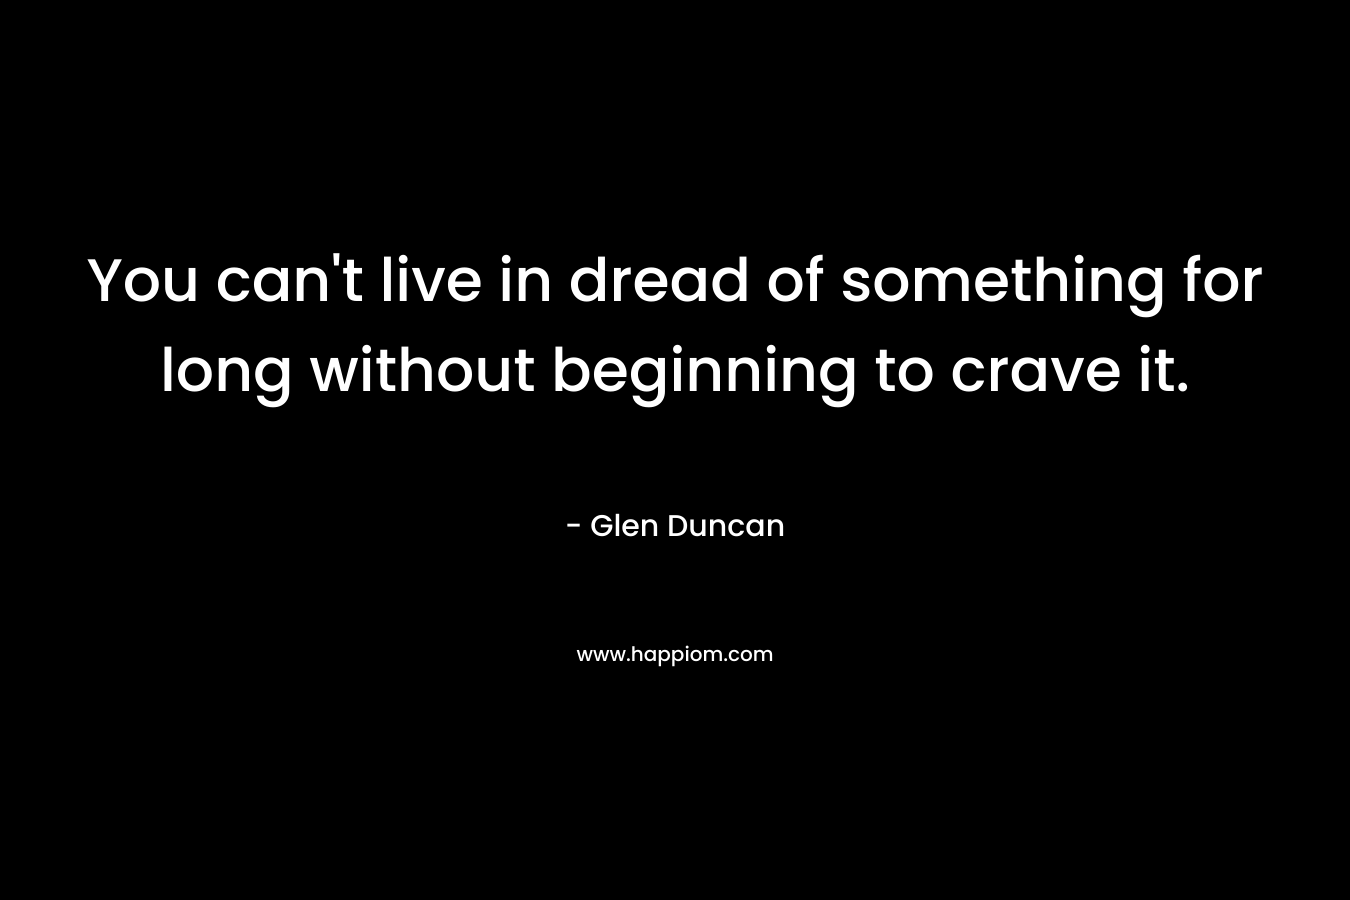 You can't live in dread of something for long without beginning to crave it.